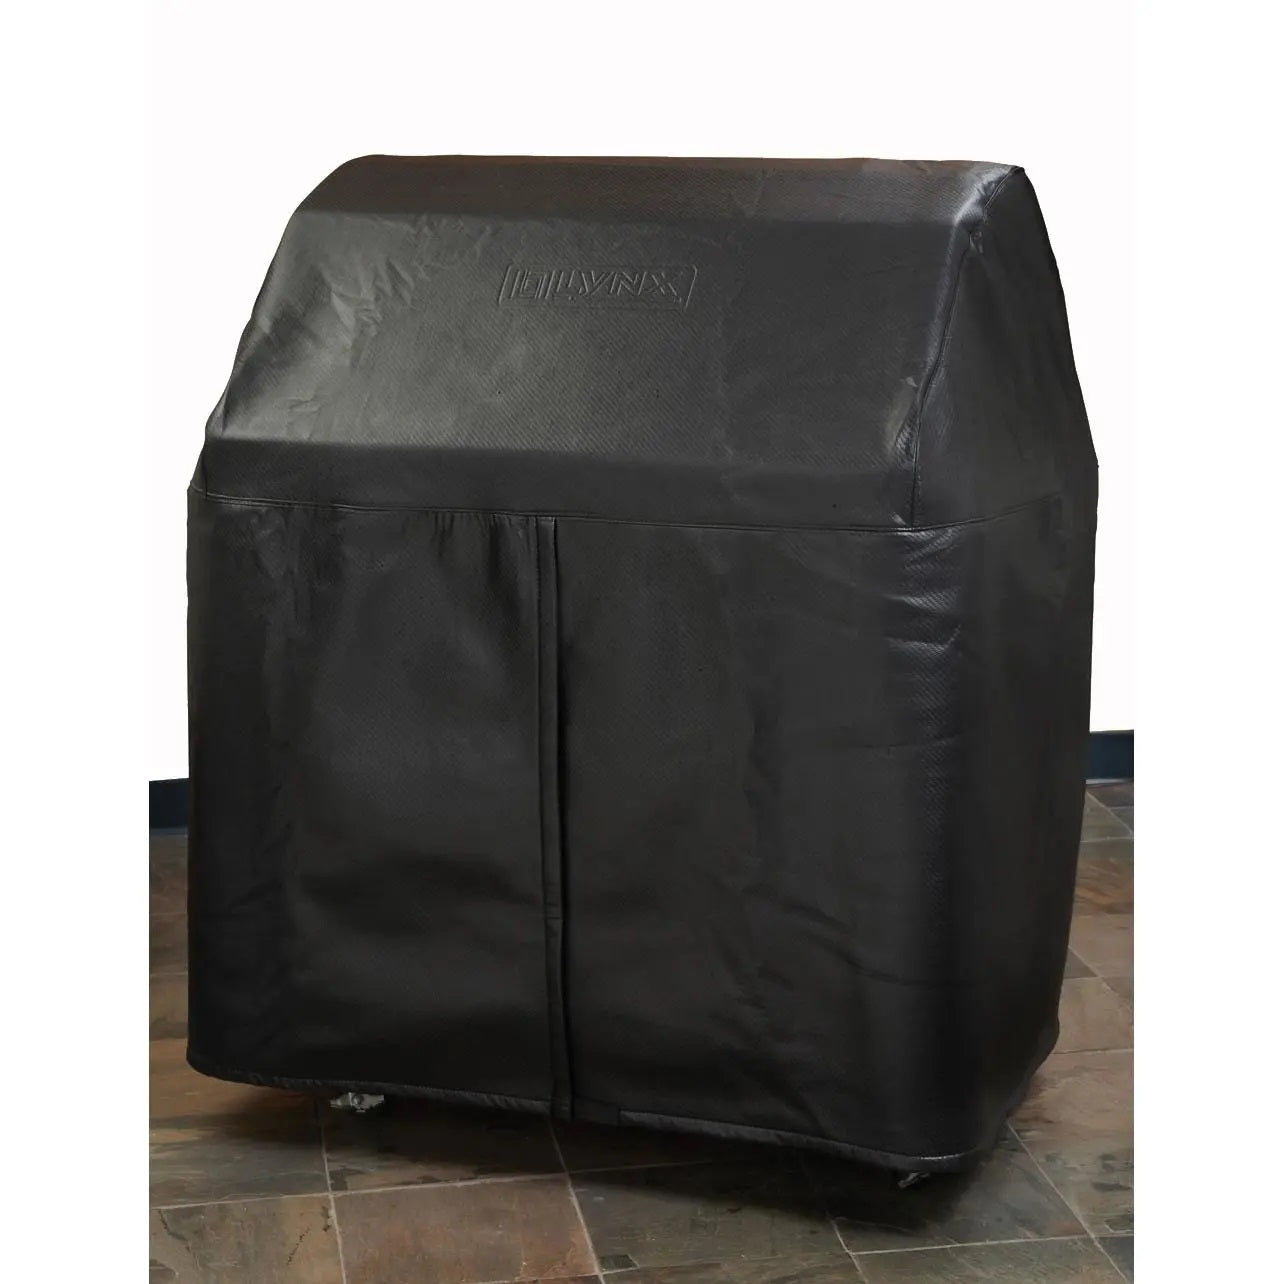 Lynx Grill Cover For 36-Inch Professional Freestanding Gas 